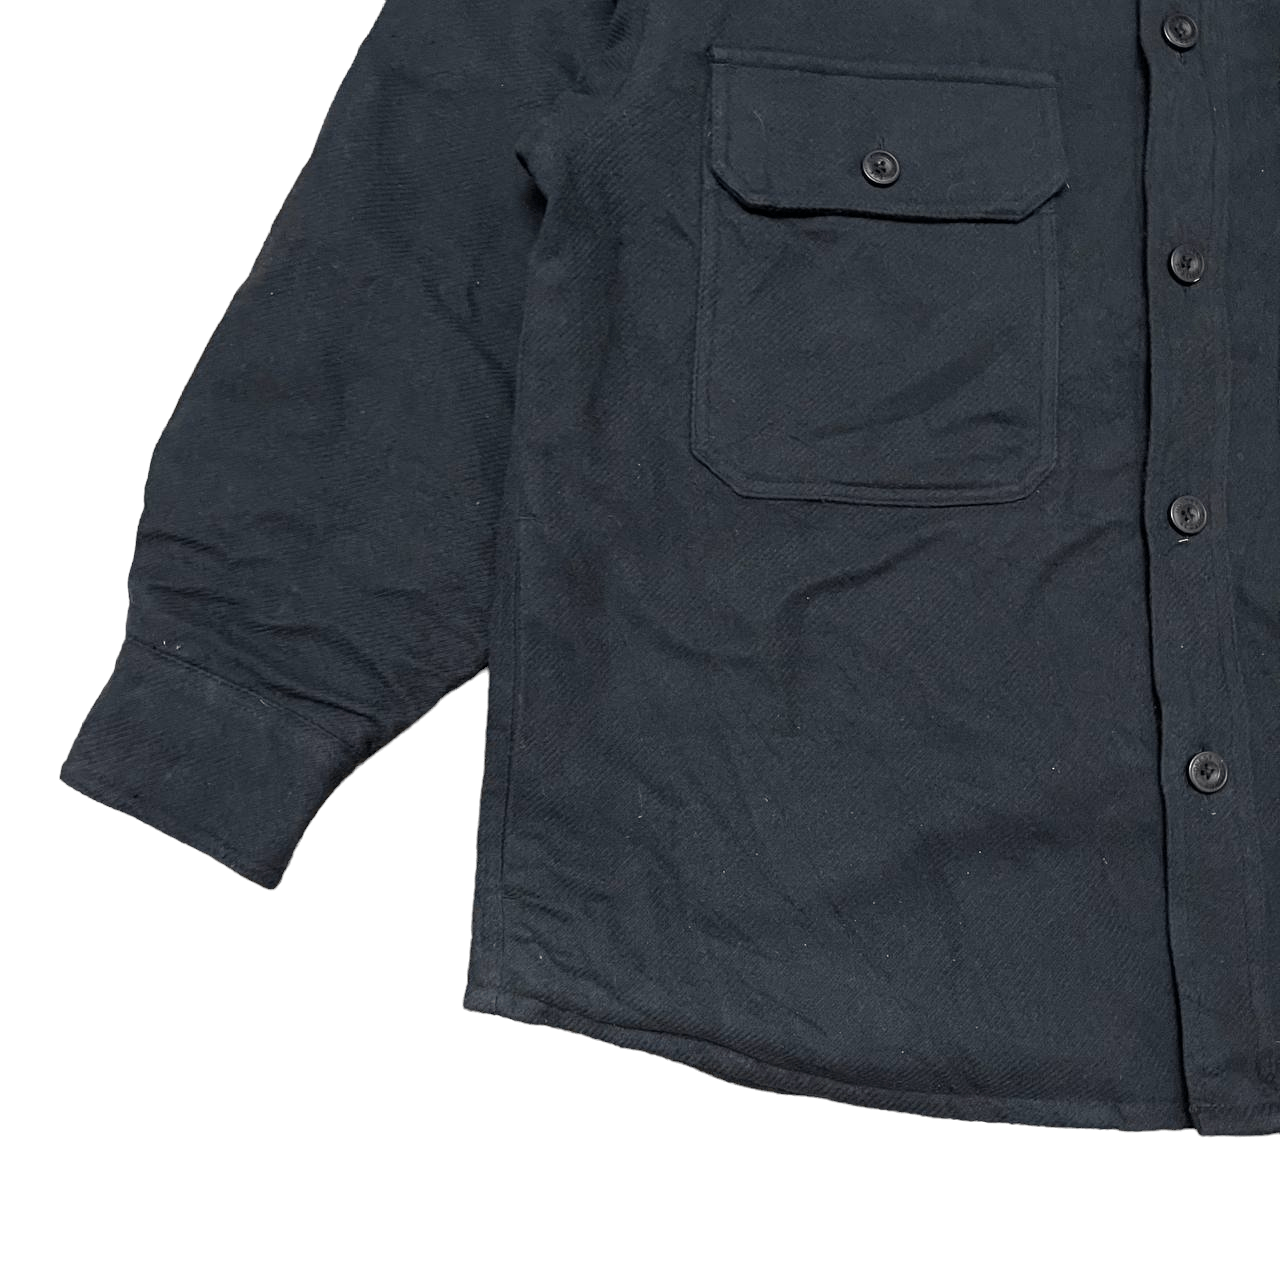 Japanese Brand - Vintage Honest College by Studio Seven Jacket Embroidery - 5